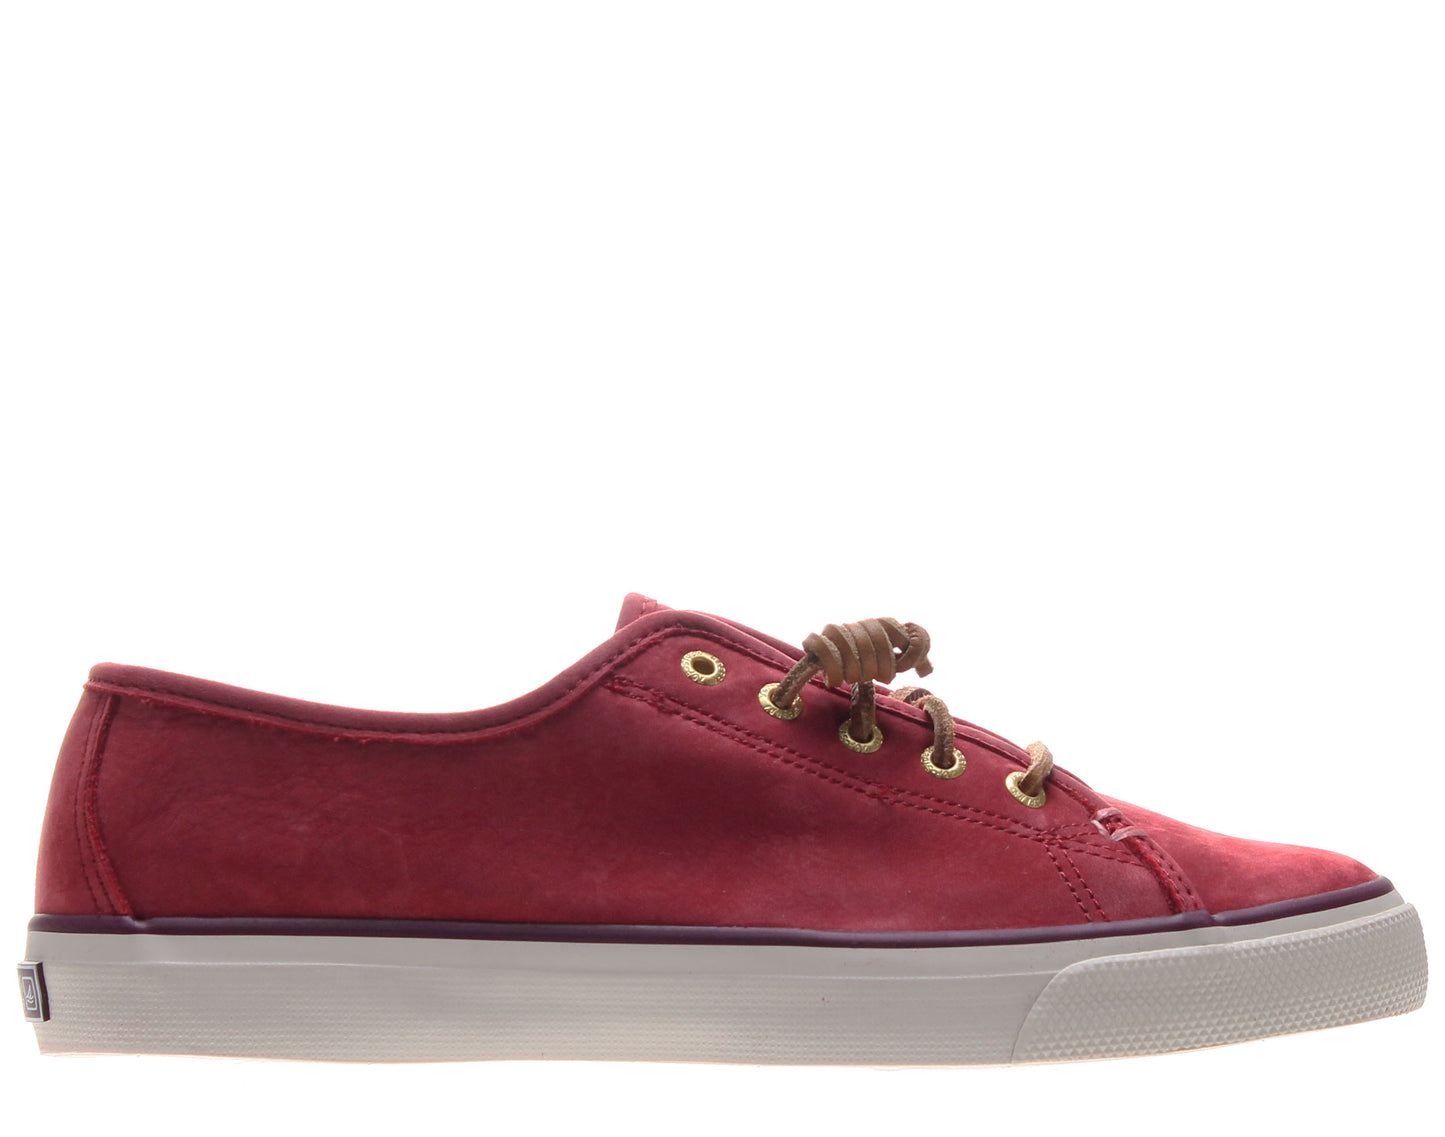 Sperry Top Sider Seacoast Women's Casual Shoes